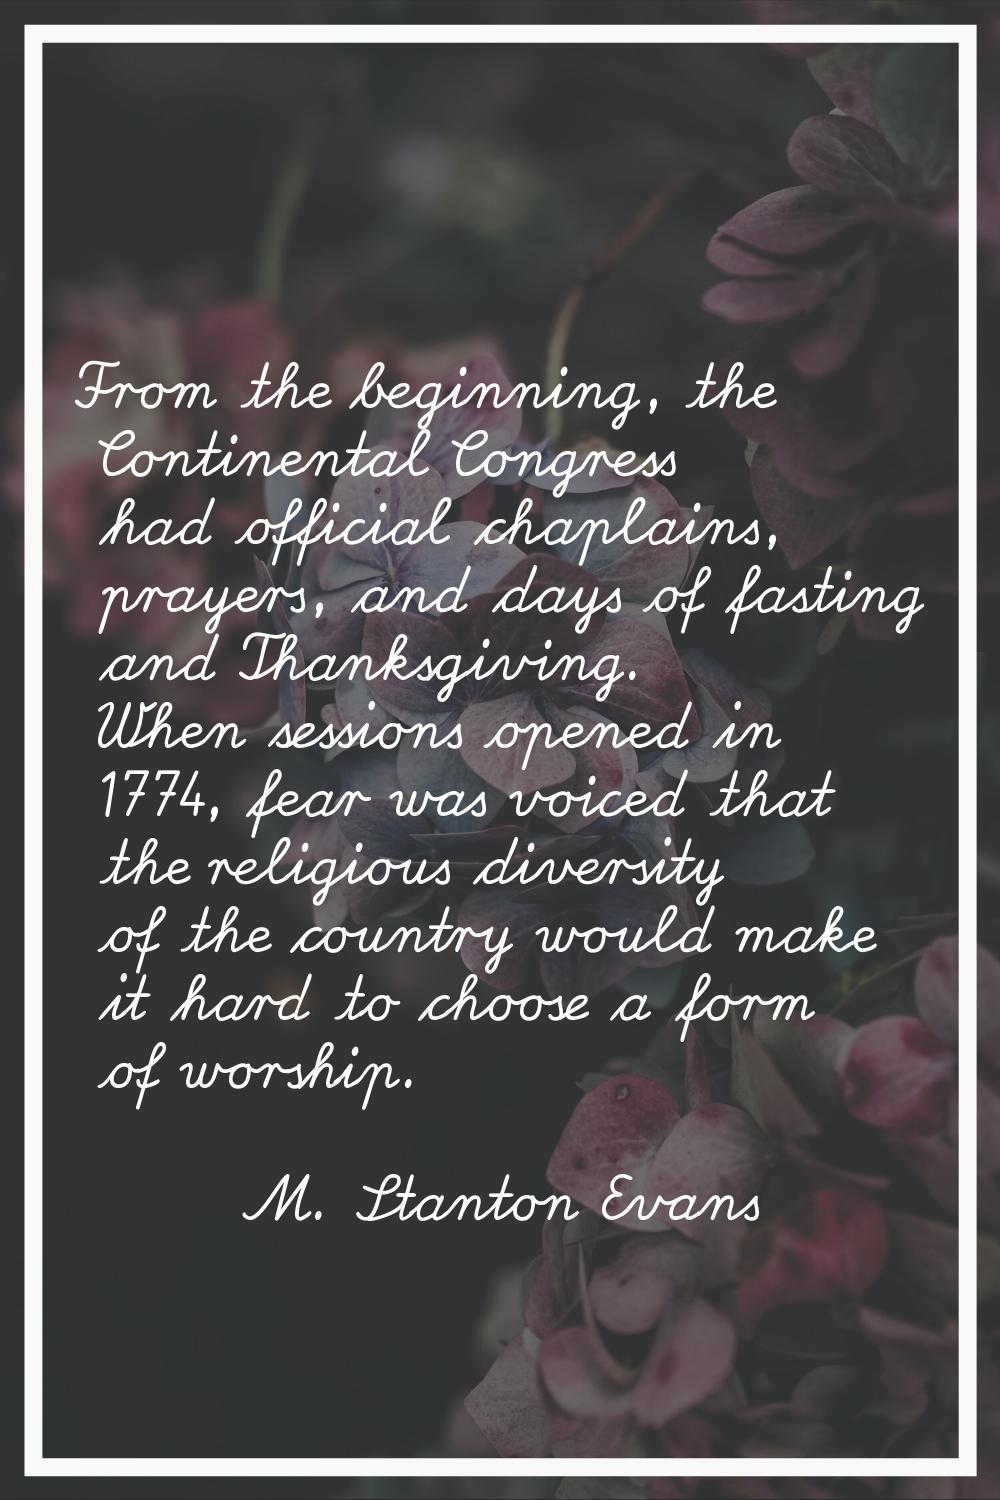 From the beginning, the Continental Congress had official chaplains, prayers, and days of fasting a